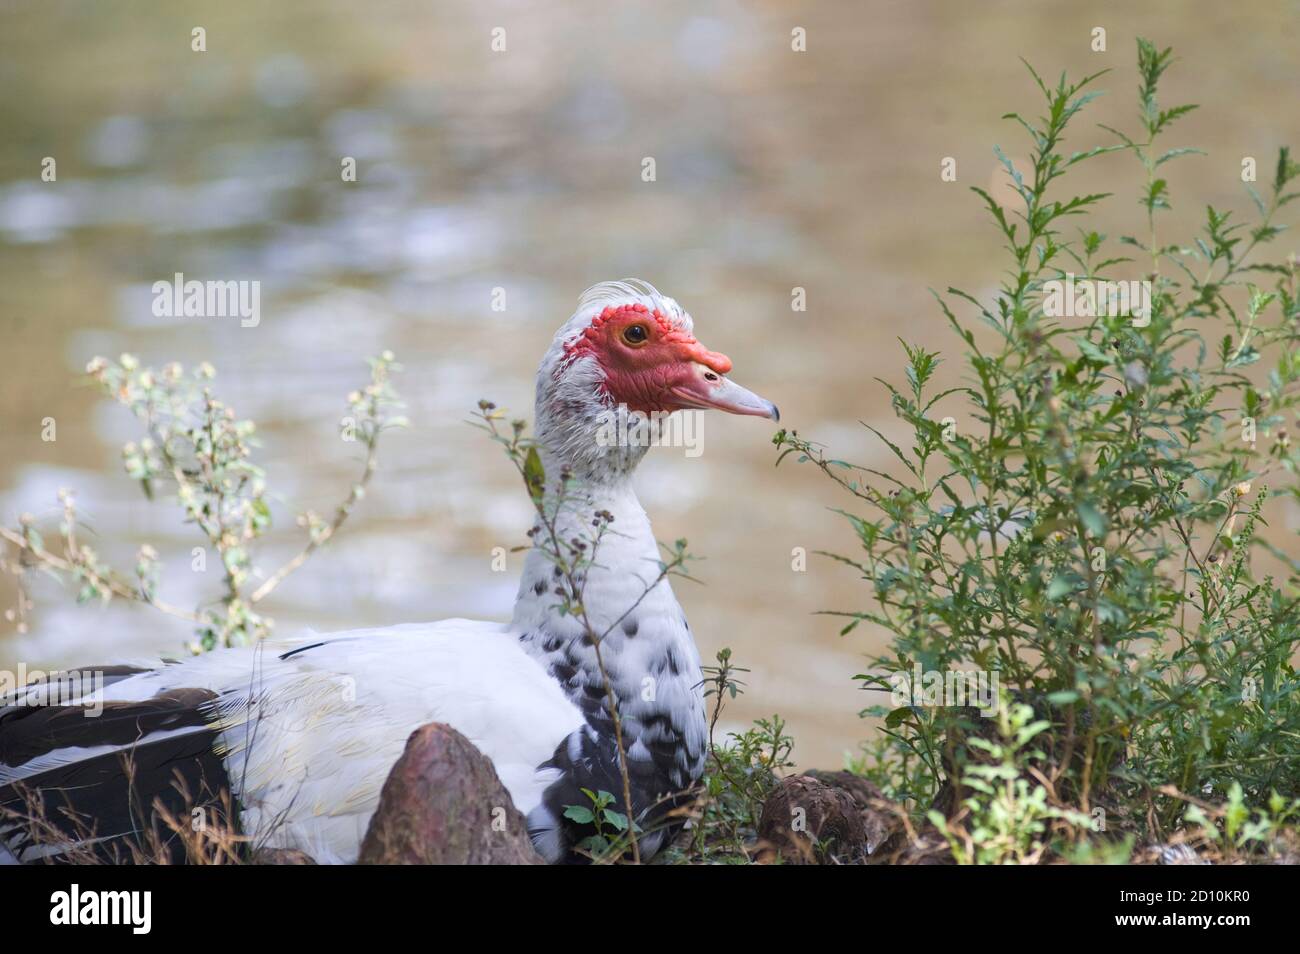 Black and white Domestic Muscovy duck, with bright red caruncles on it's face, enjoying the nice weather at a city park in Huntsville, TX. Stock Photo